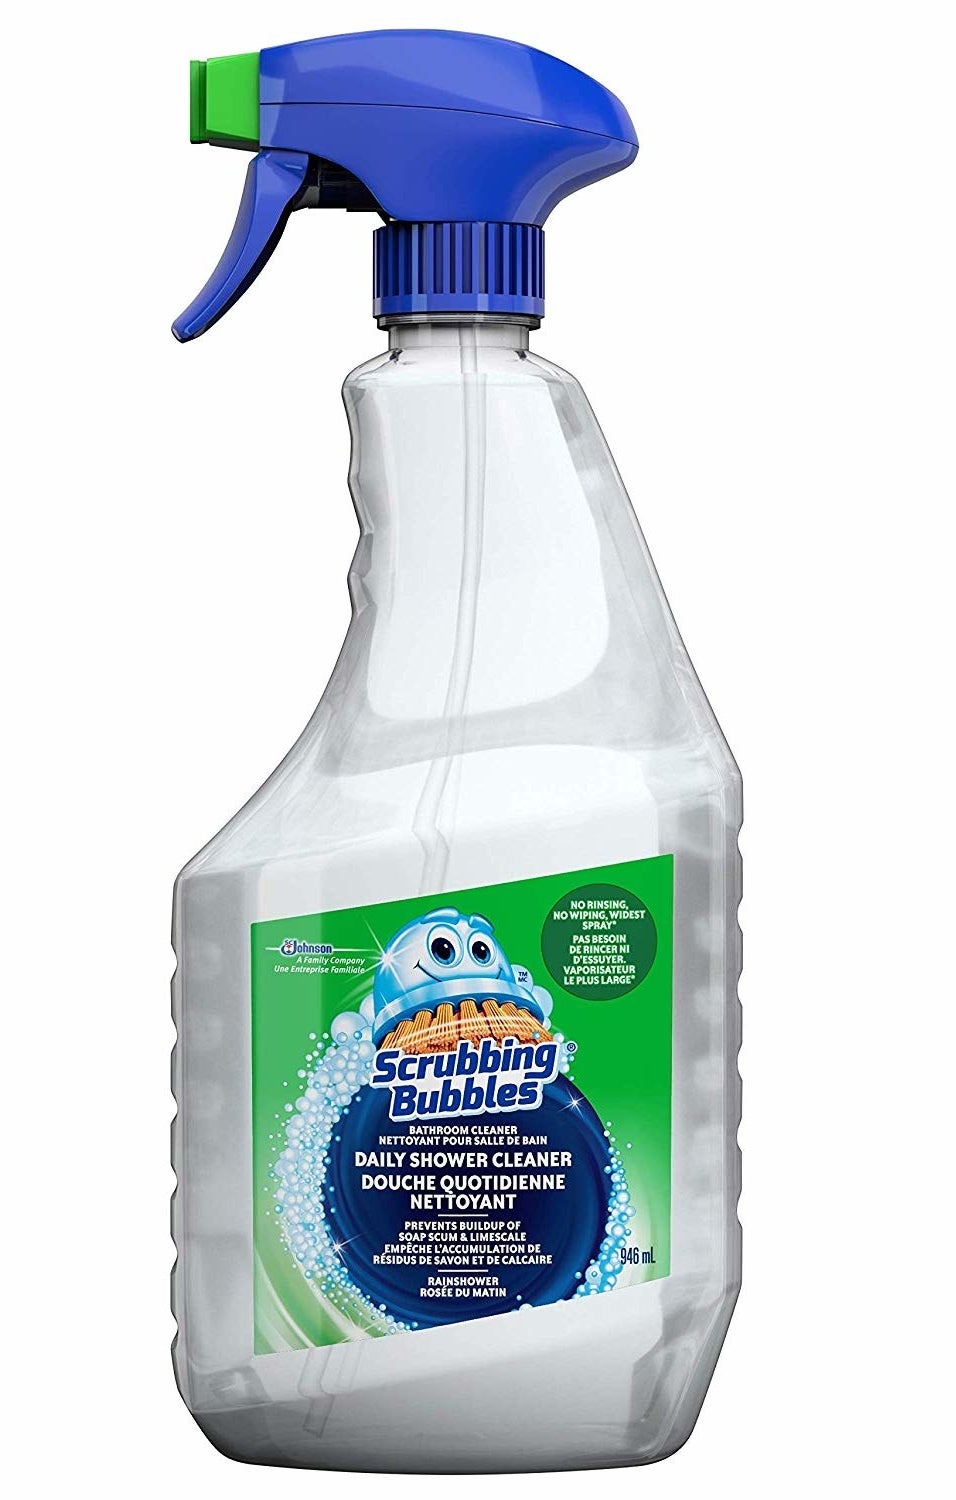 A bottle of cleaning spray for the bathtub